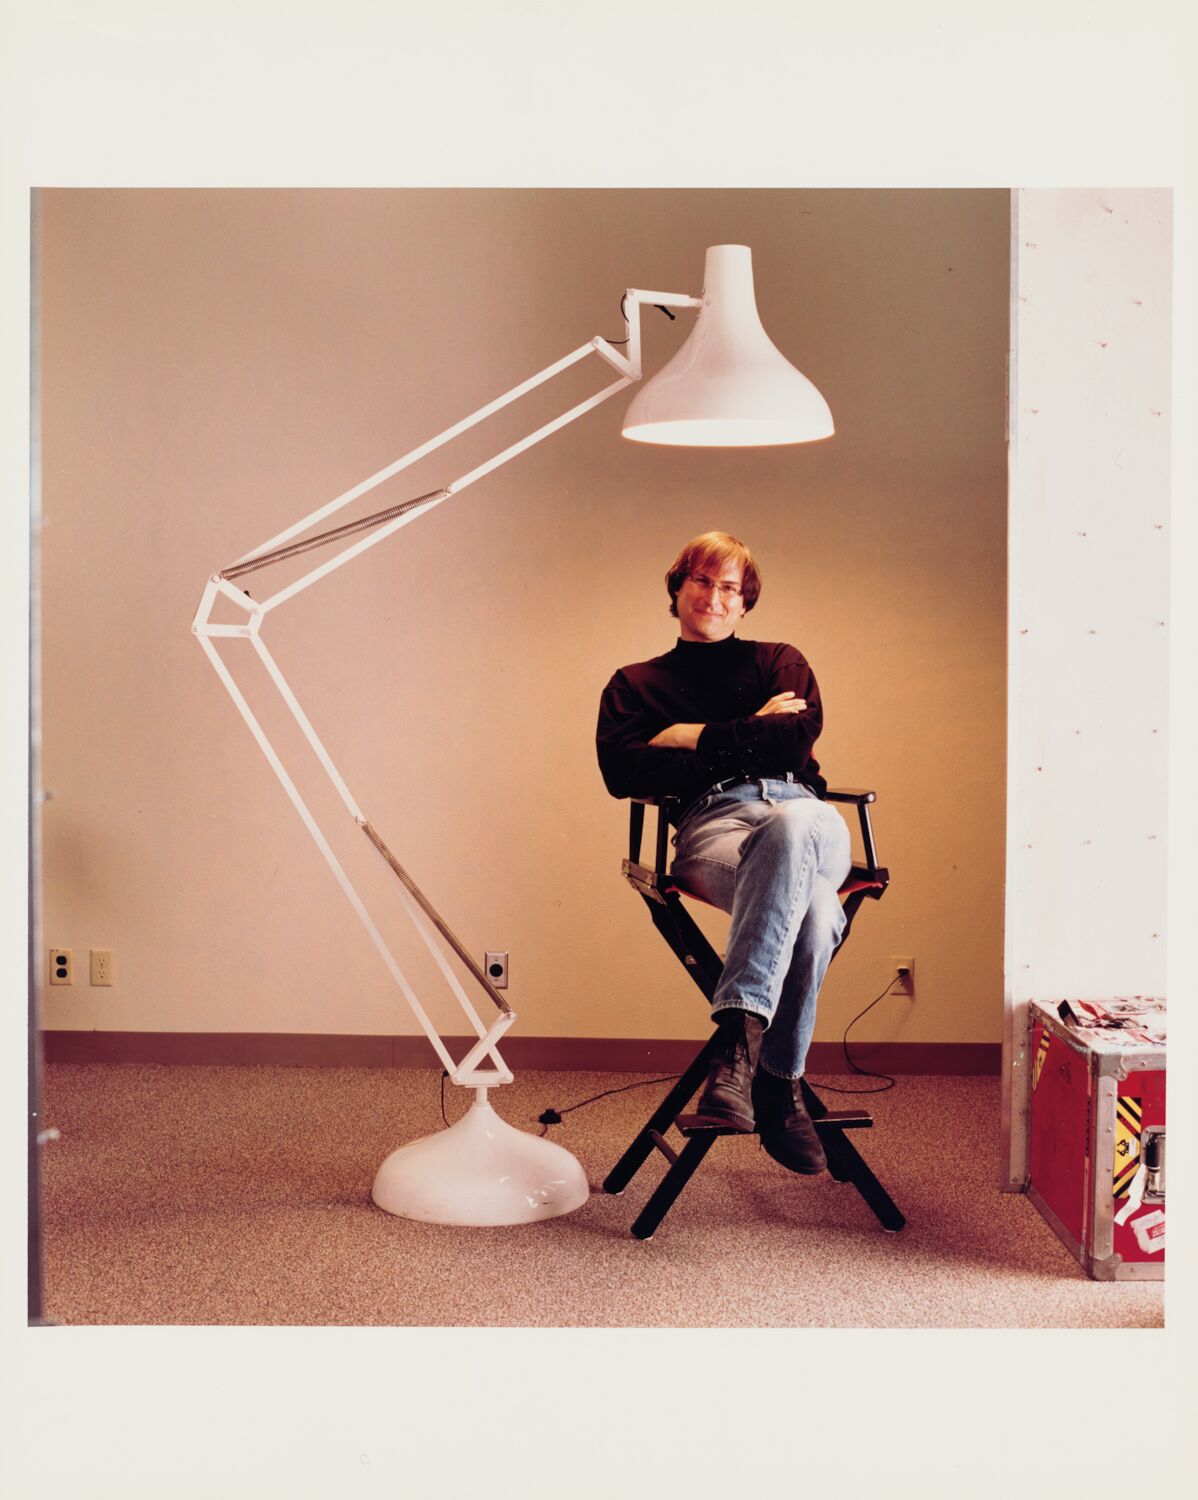 Steve, now wearing glasses, sits cross-legged in a director's chair under an oversized anglepoise Pixar-style lamp.